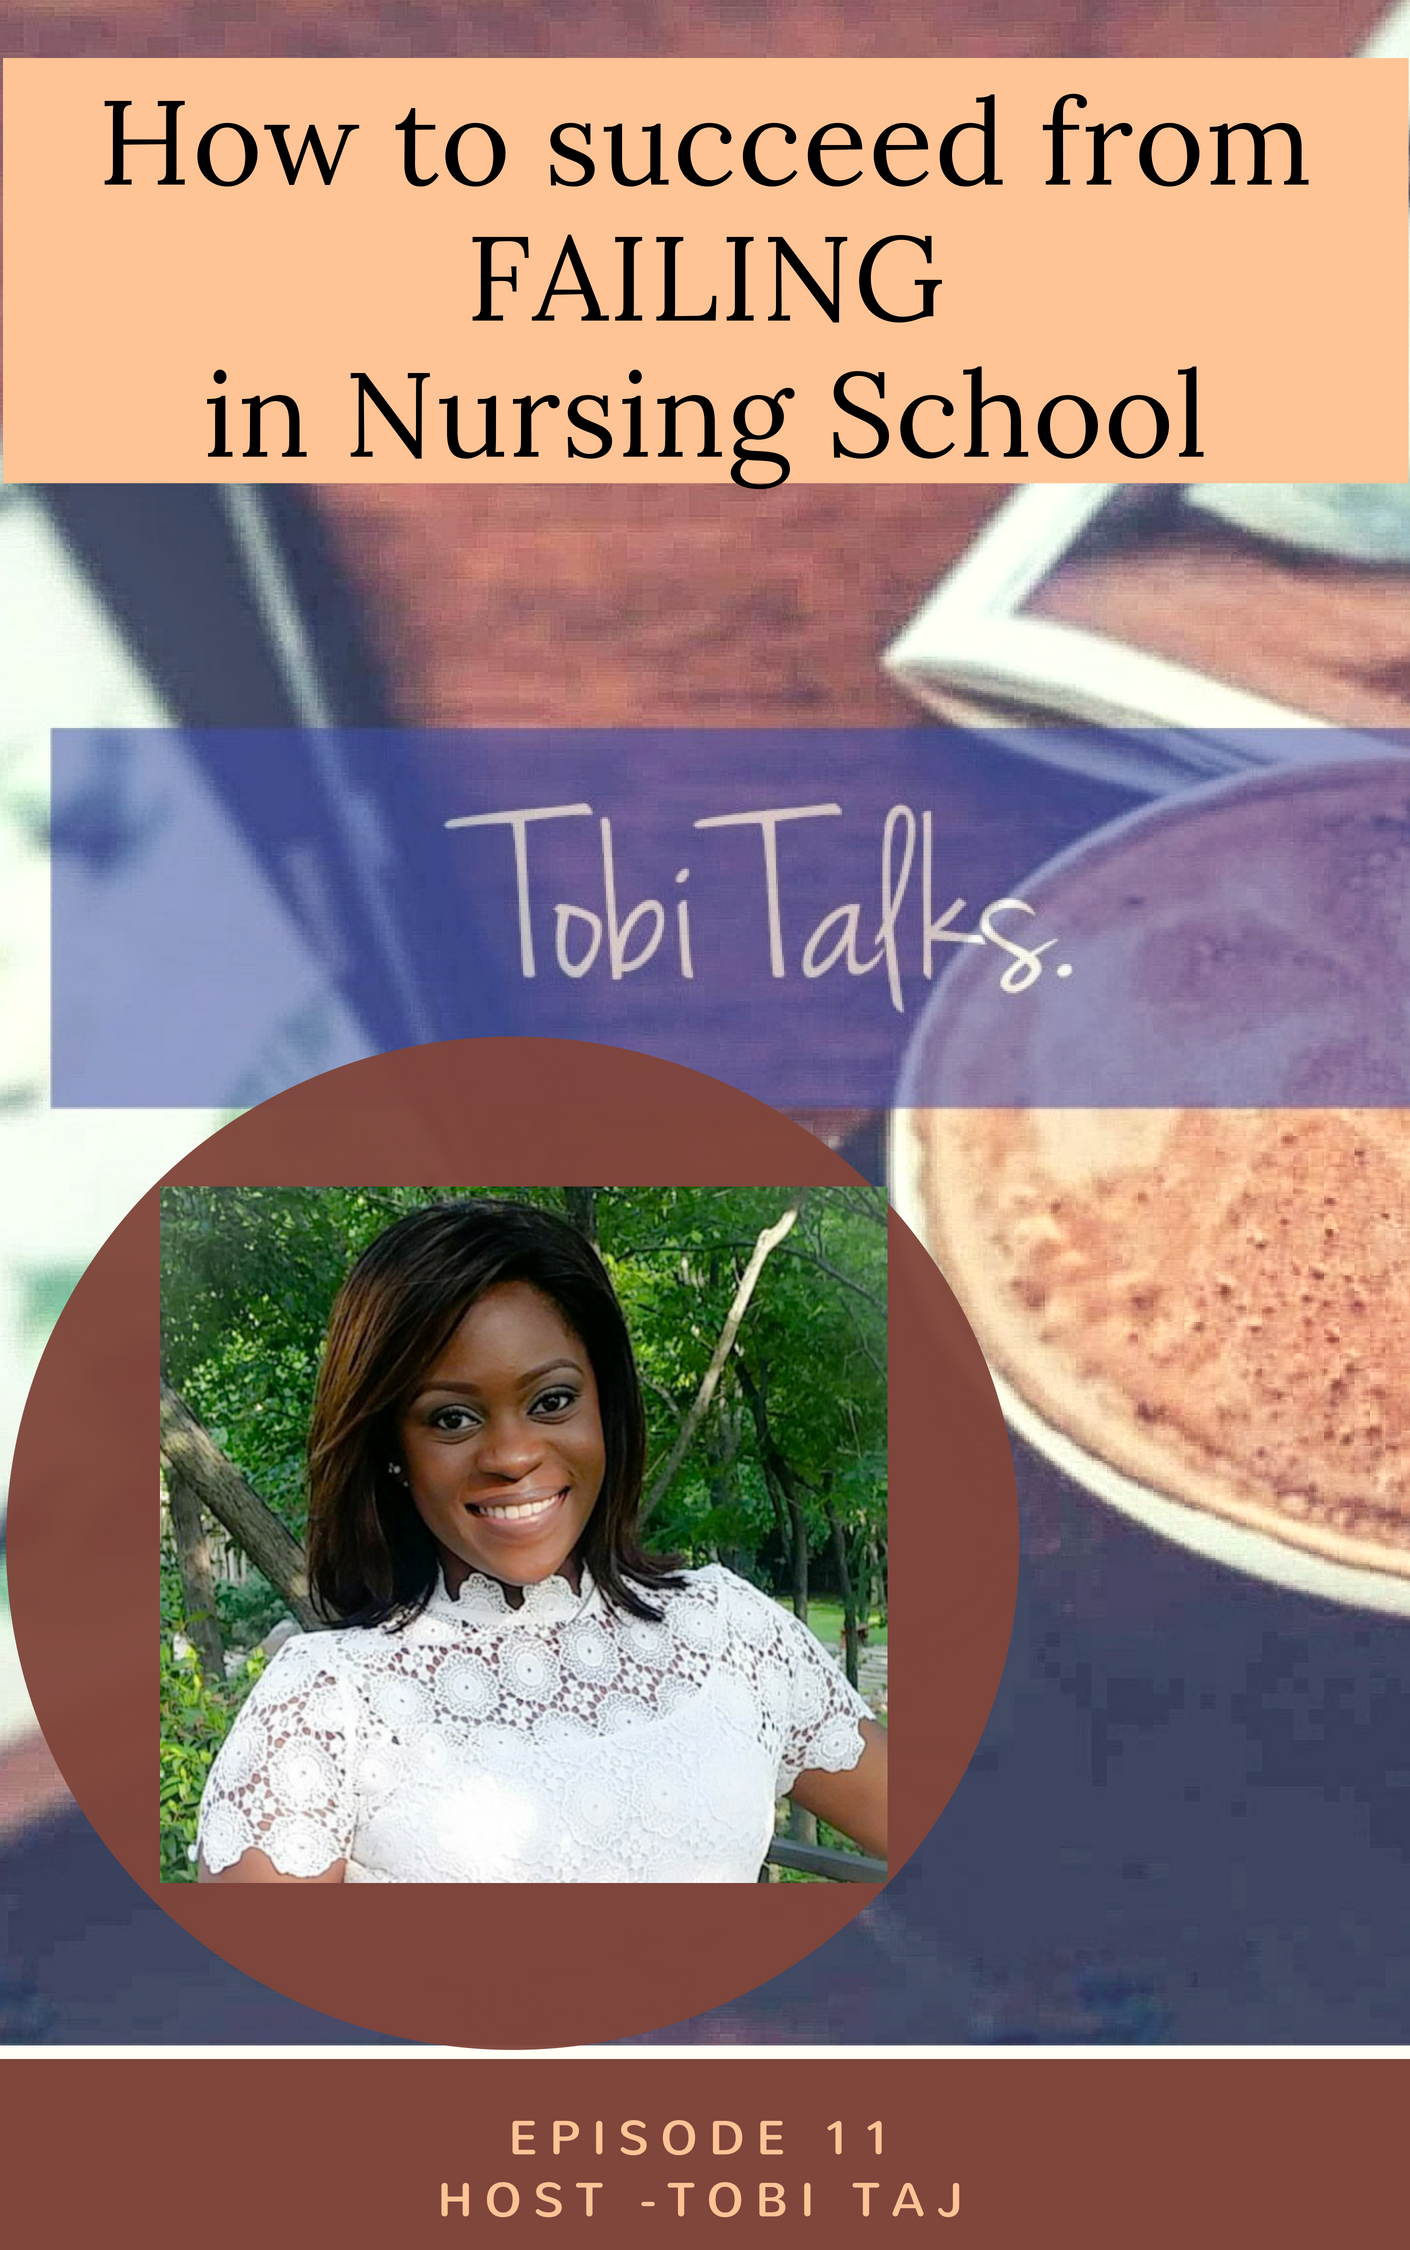 How to succeed from FAILING in Nursing School